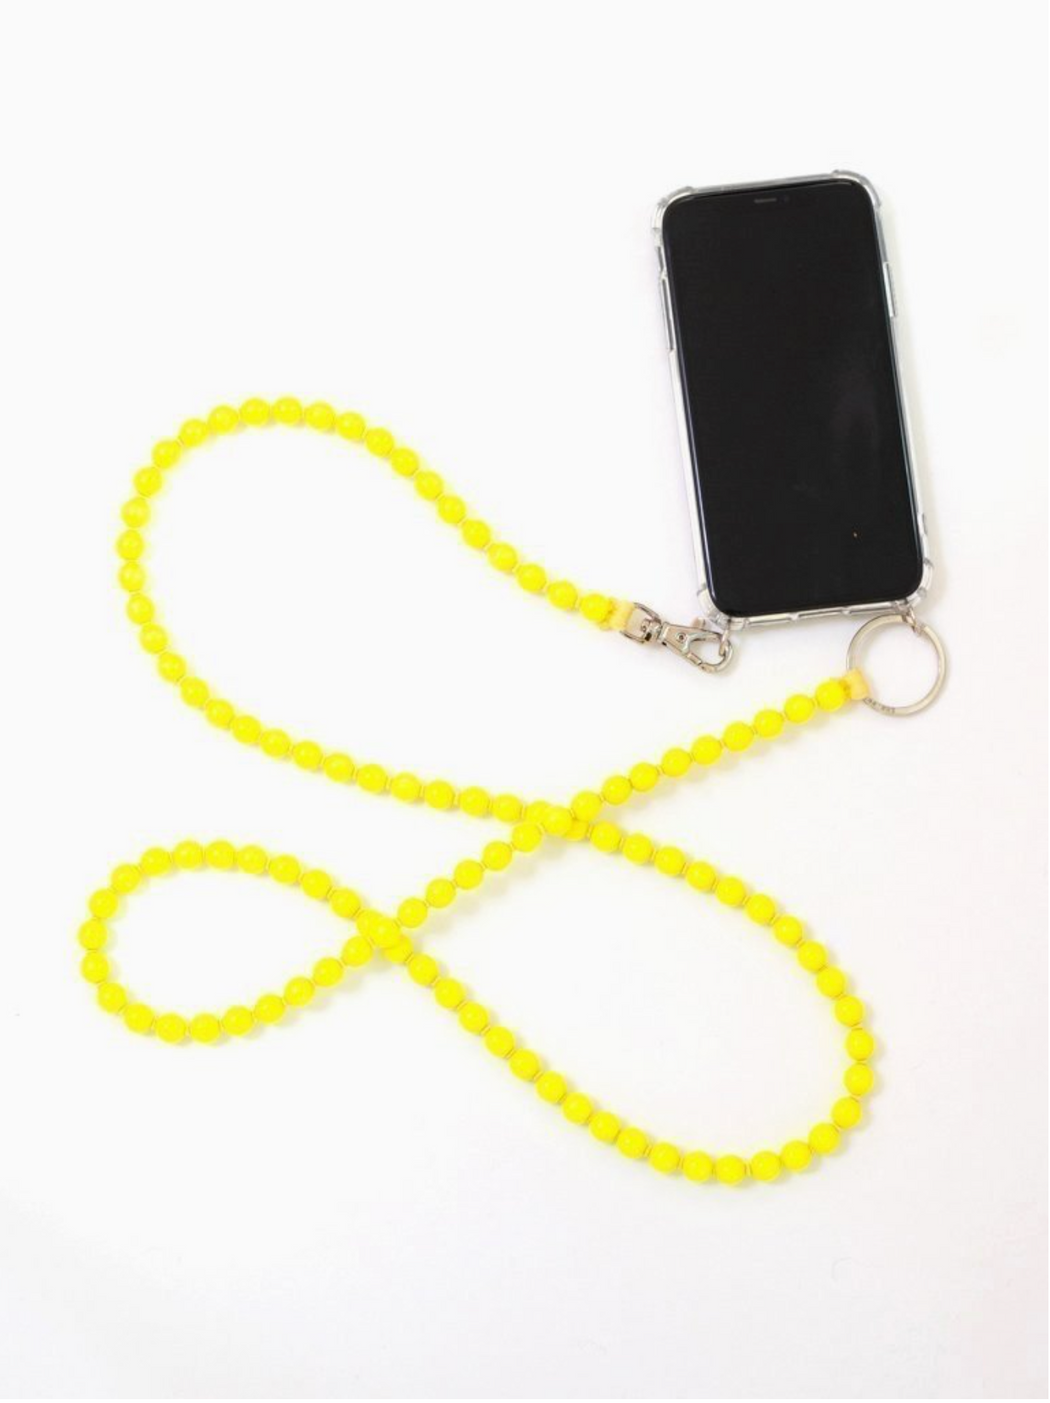 Ina Seifart :: Phone Necklace